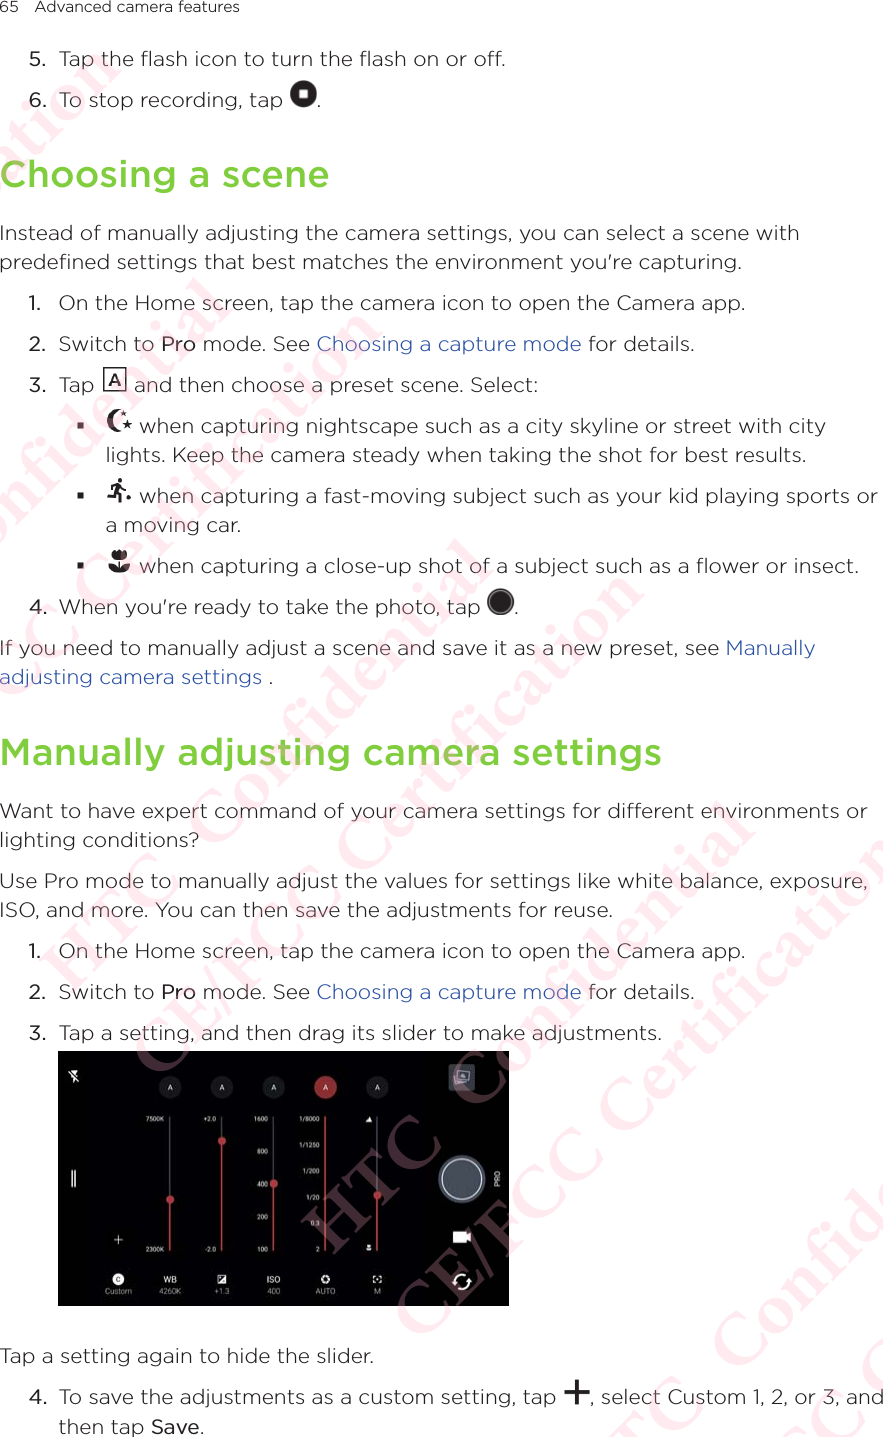 65 Advanced camera features5.  Tap the flash icon to turn the flash on or off. 6.  To stop recording, tap  . Choosing a sceneInstead of manually adjusting the camera settings, you can select a scene with predefined settings that best matches the environment you&apos;re capturing. 1.  On the Home screen, tap the camera icon to open the Camera app. 2.  Switch to Pro mode. See Choosing a capture mode for details. 3.  Tap   and then choose a preset scene. Select:  when capturing nightscape such as a city skyline or street with city lights. Keep the camera steady when taking the shot for best results.  when capturing a fast-moving subject such as your kid playing sports or a moving car.   when capturing a close-up shot of a subject such as a flower or insect.4.  When you&apos;re ready to take the photo, tap  . If you need to manually adjust a scene and save it as a new preset, see Manually adjusting camera settings .Manually adjusting camera settings Want to have expert command of your camera settings for different environments or lighting conditions? Use Pro mode to manually adjust the values for settings like white balance, exposure, ISO, and more. You can then save the adjustments for reuse. 1.  On the Home screen, tap the camera icon to open the Camera app. 2.  Switch to Pro mode. See Choosing a capture mode for details. 3.  Tap a setting, and then drag its slider to make adjustments.  Tap a setting again to hide the slider.4.  To save the adjustments as a custom setting, tap  , select Custom 1, 2, or 3, and then tap Save.HTC  Confidential CE/FCC Certification  HTC  Confidential CE/FCC Certification  HTC  Confidential CE/FCC Certification  HTC  Confidential CE/FCC Certification  HTC  Confidential CE/FCC Certification 